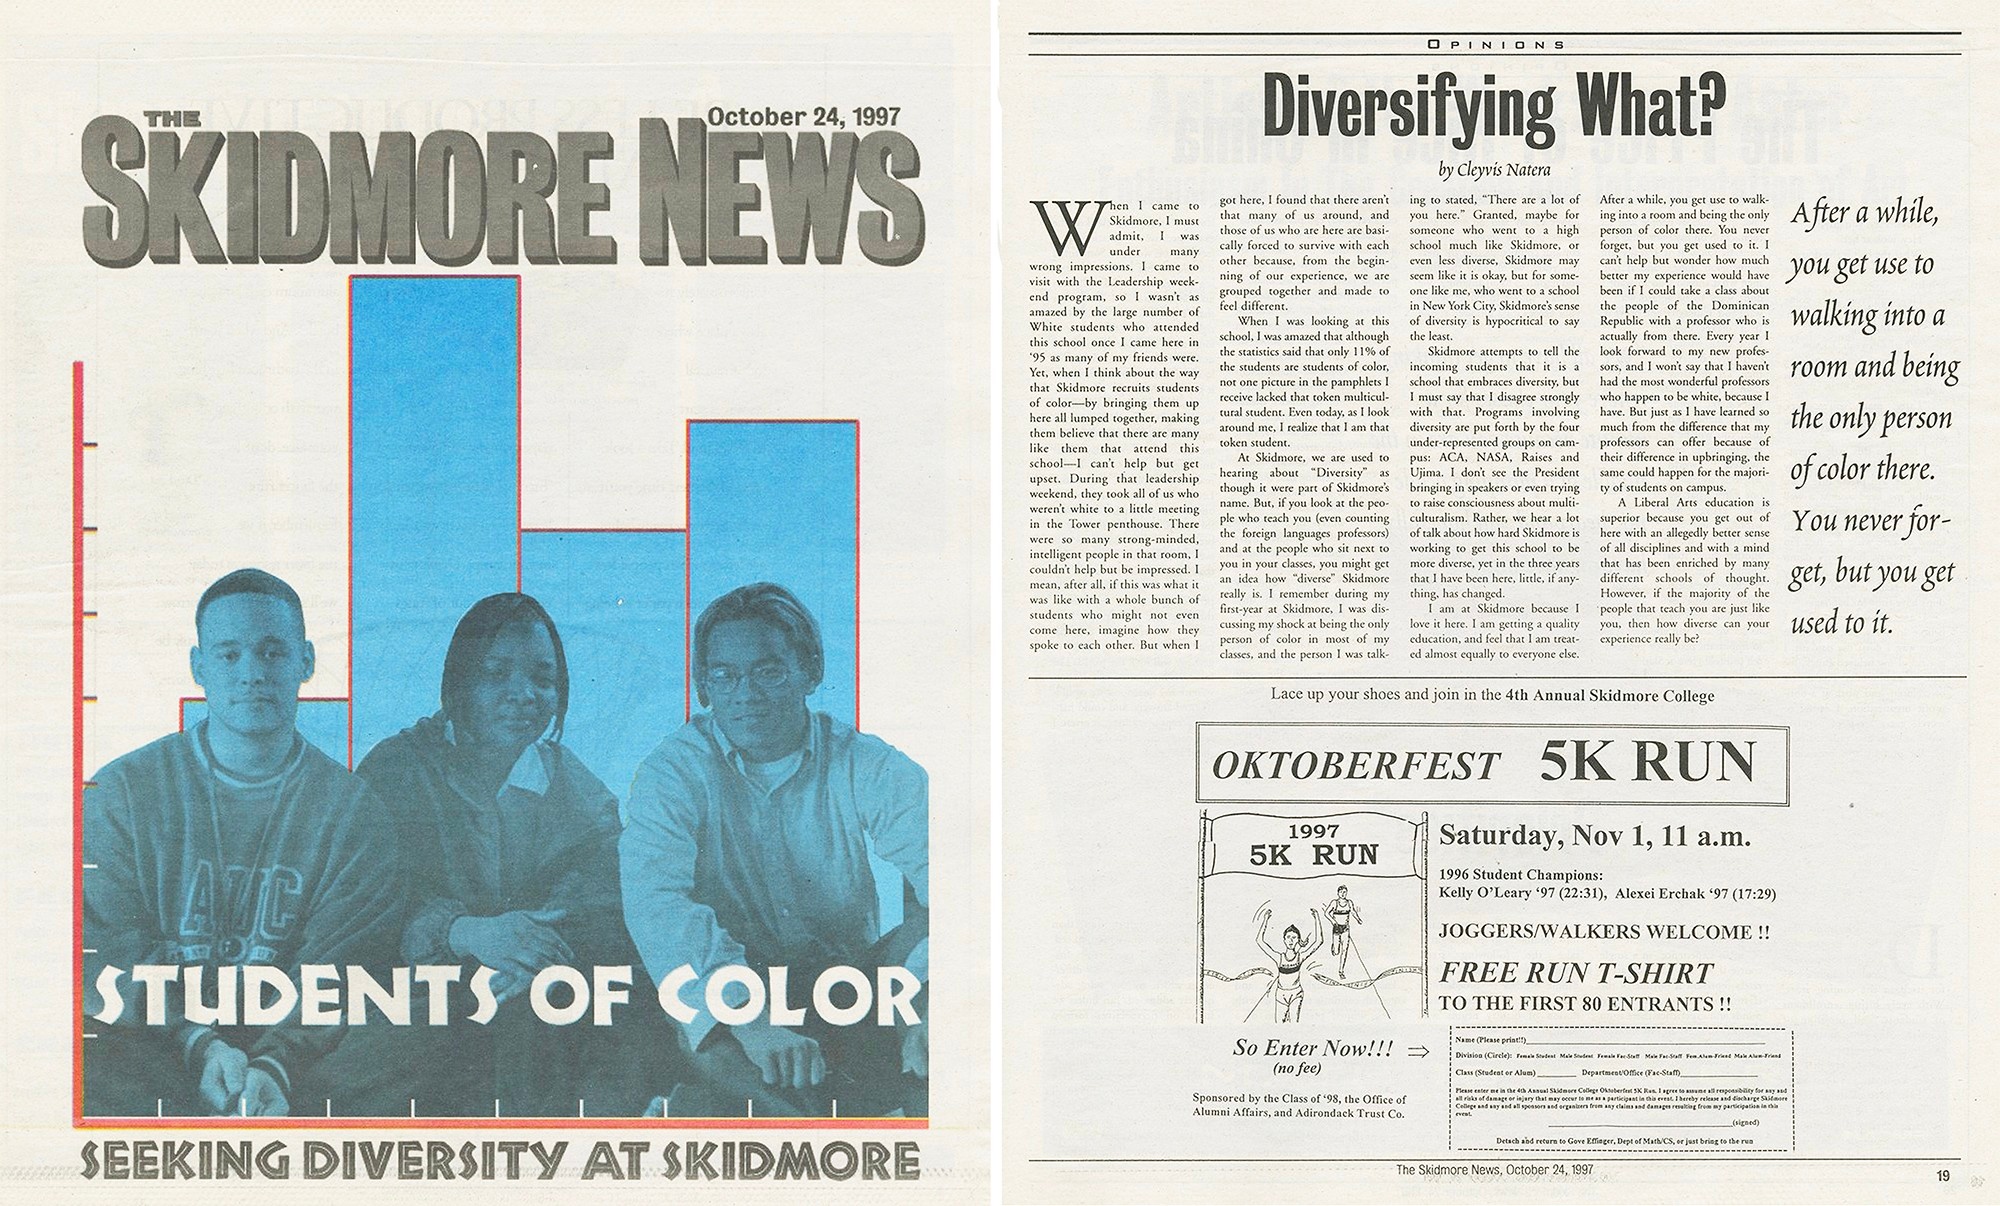 The front fold of a Skidmore newspaper with three images of students of color in front of blue bars on a graph with the headline "Students of Color Seeking Diversity at Skidmore" next to an article titled "Diversifying What?"